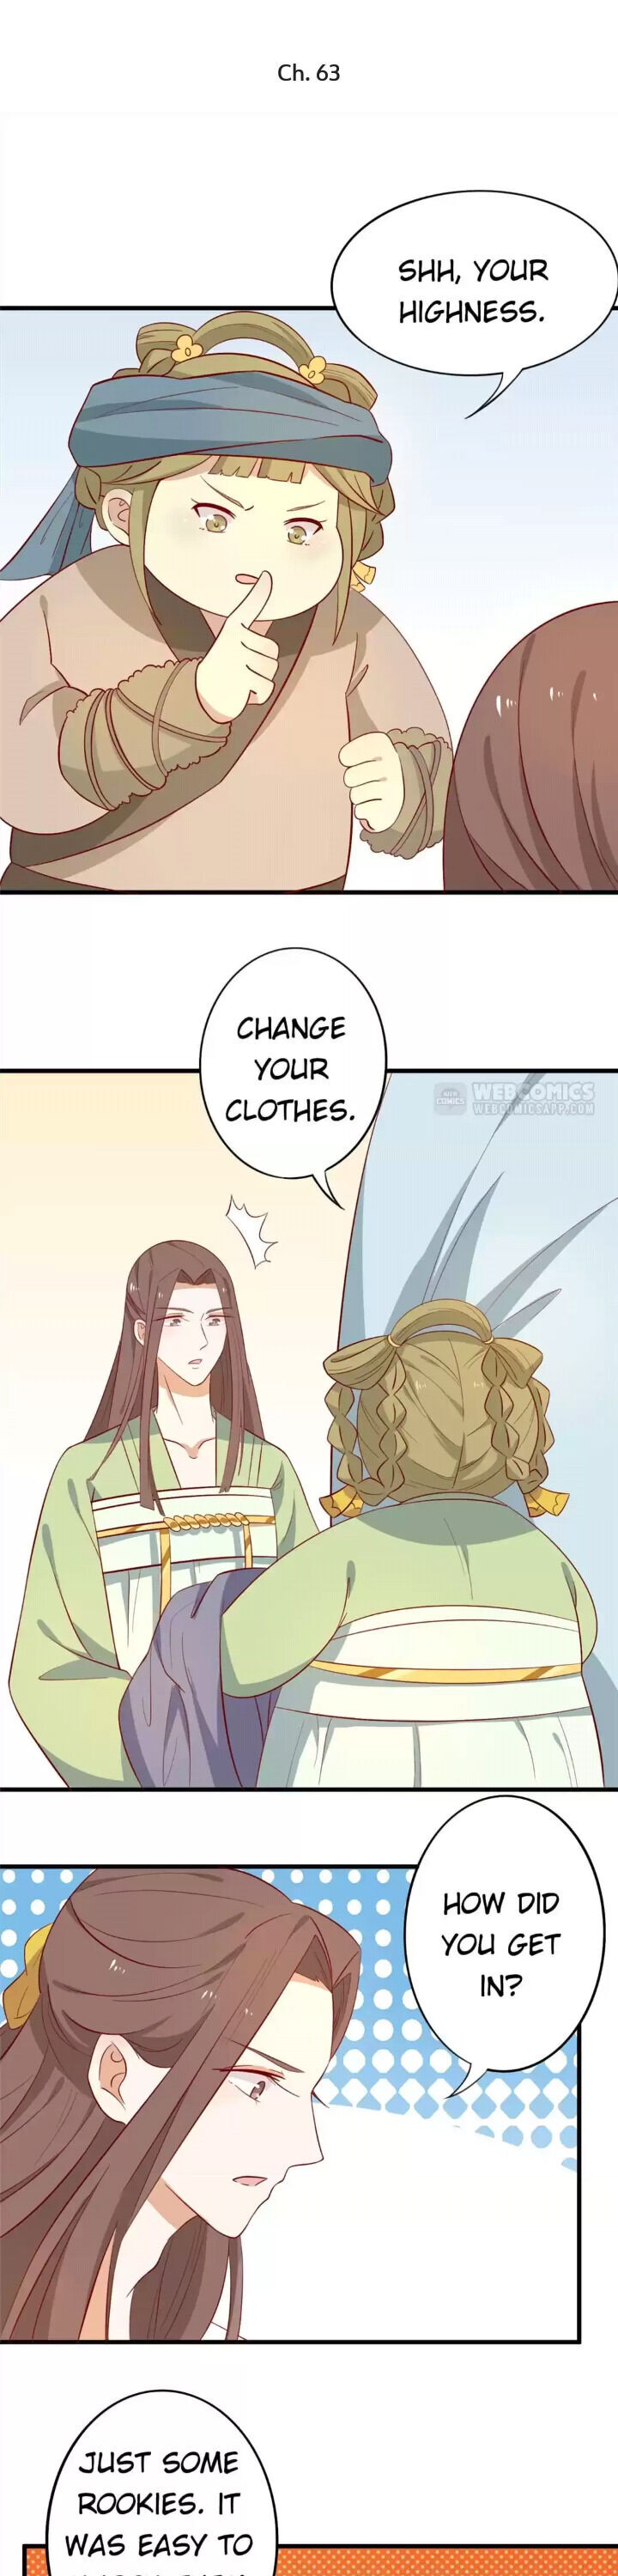 His Highness, Don't Leave! I Will Lose Weight For You! Chapter 63